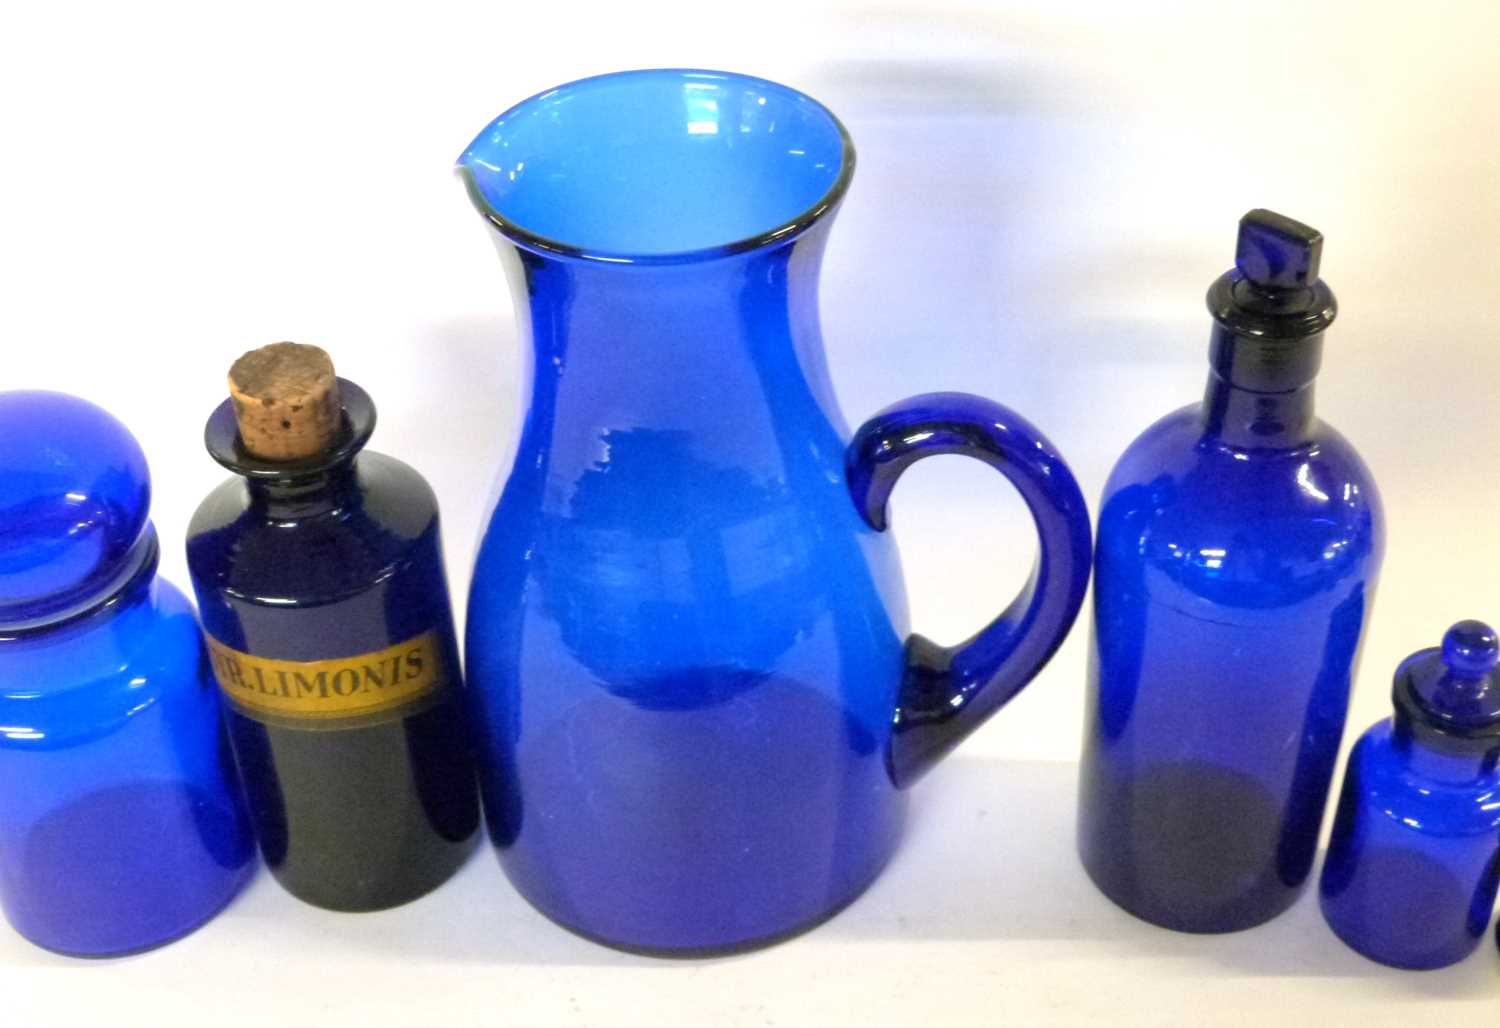 Group of Bristol blue glass wares including a large jug, eye bath and a chemists bottle - Image 3 of 3